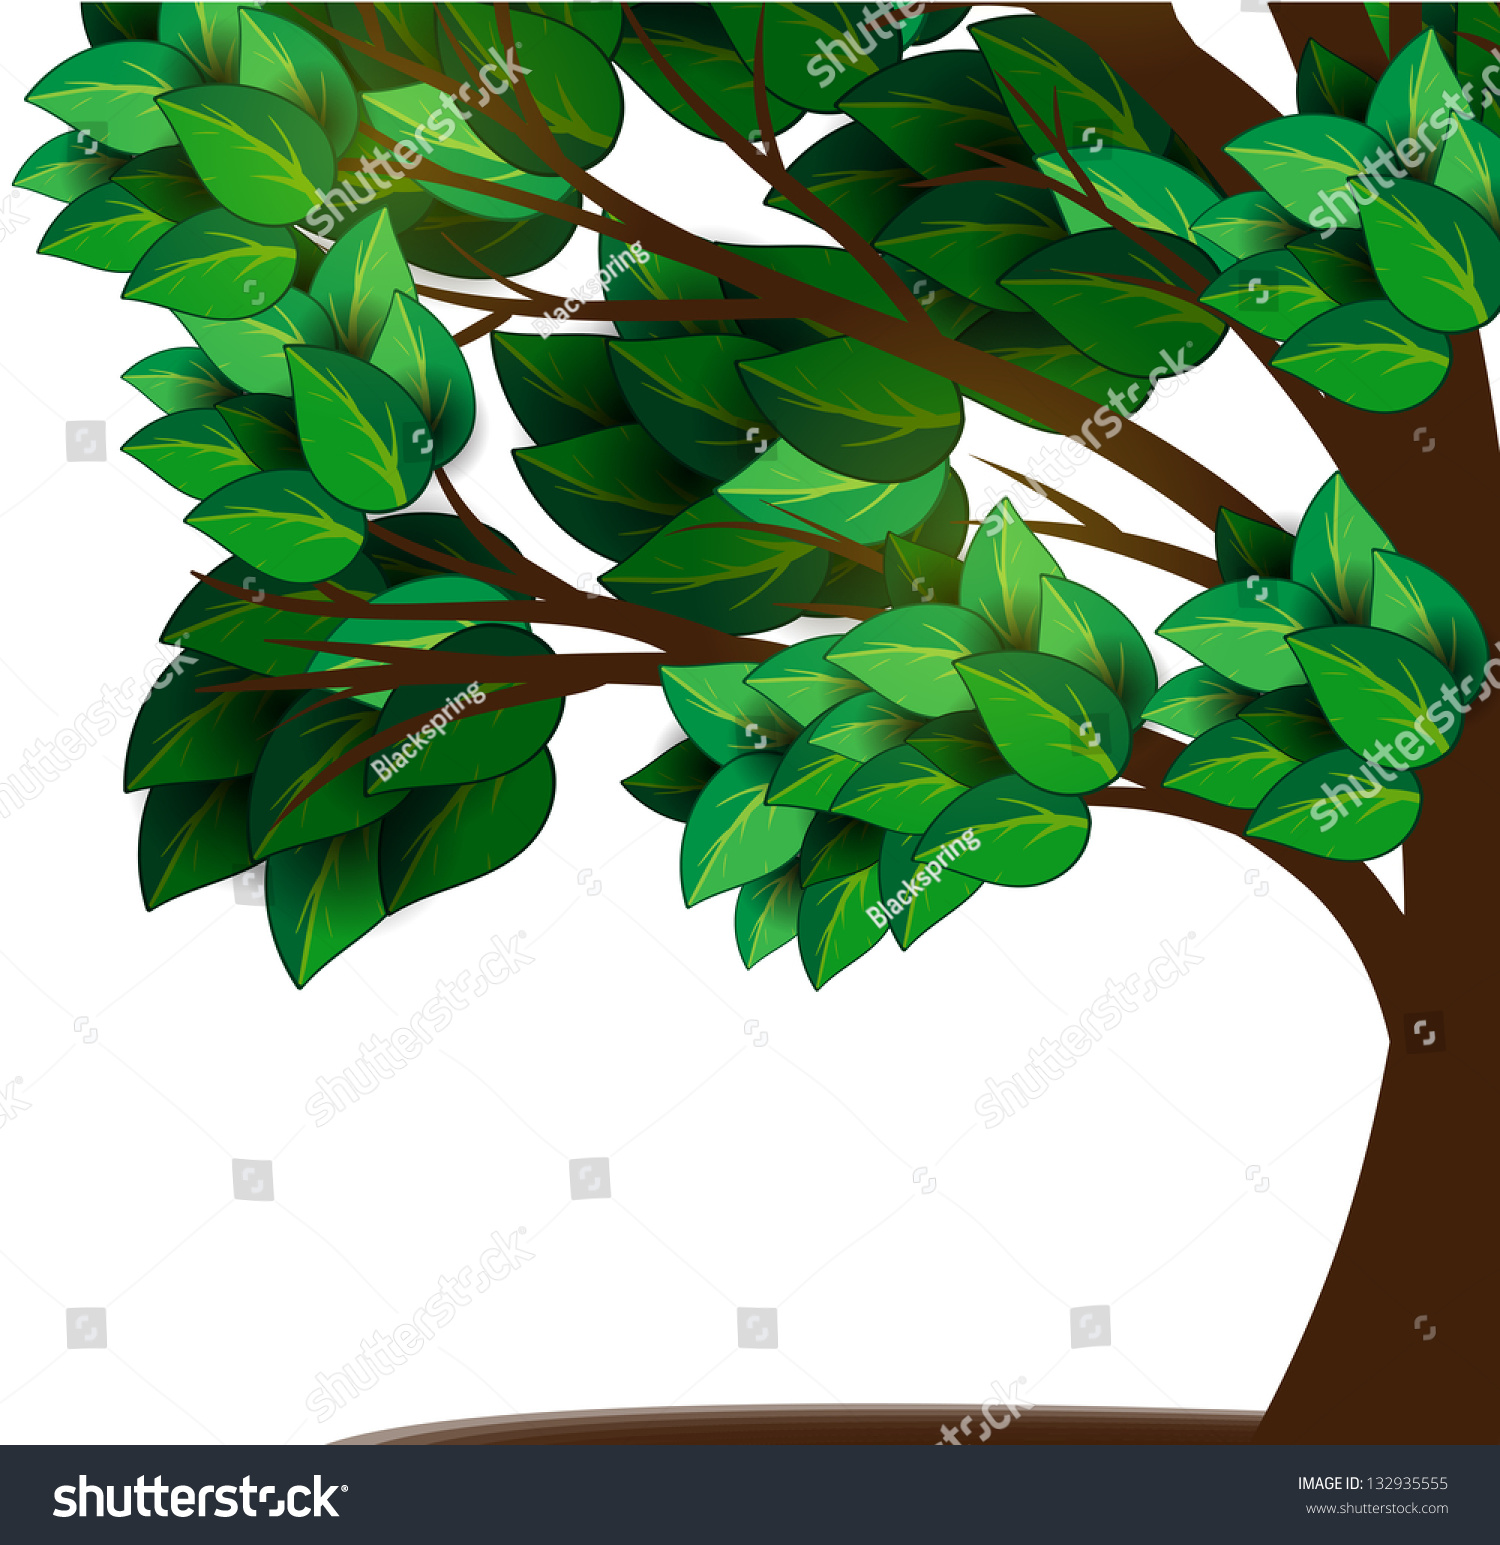 Tree With Green Leaves Stock Vector Illustration 132935555 : Shutterstock